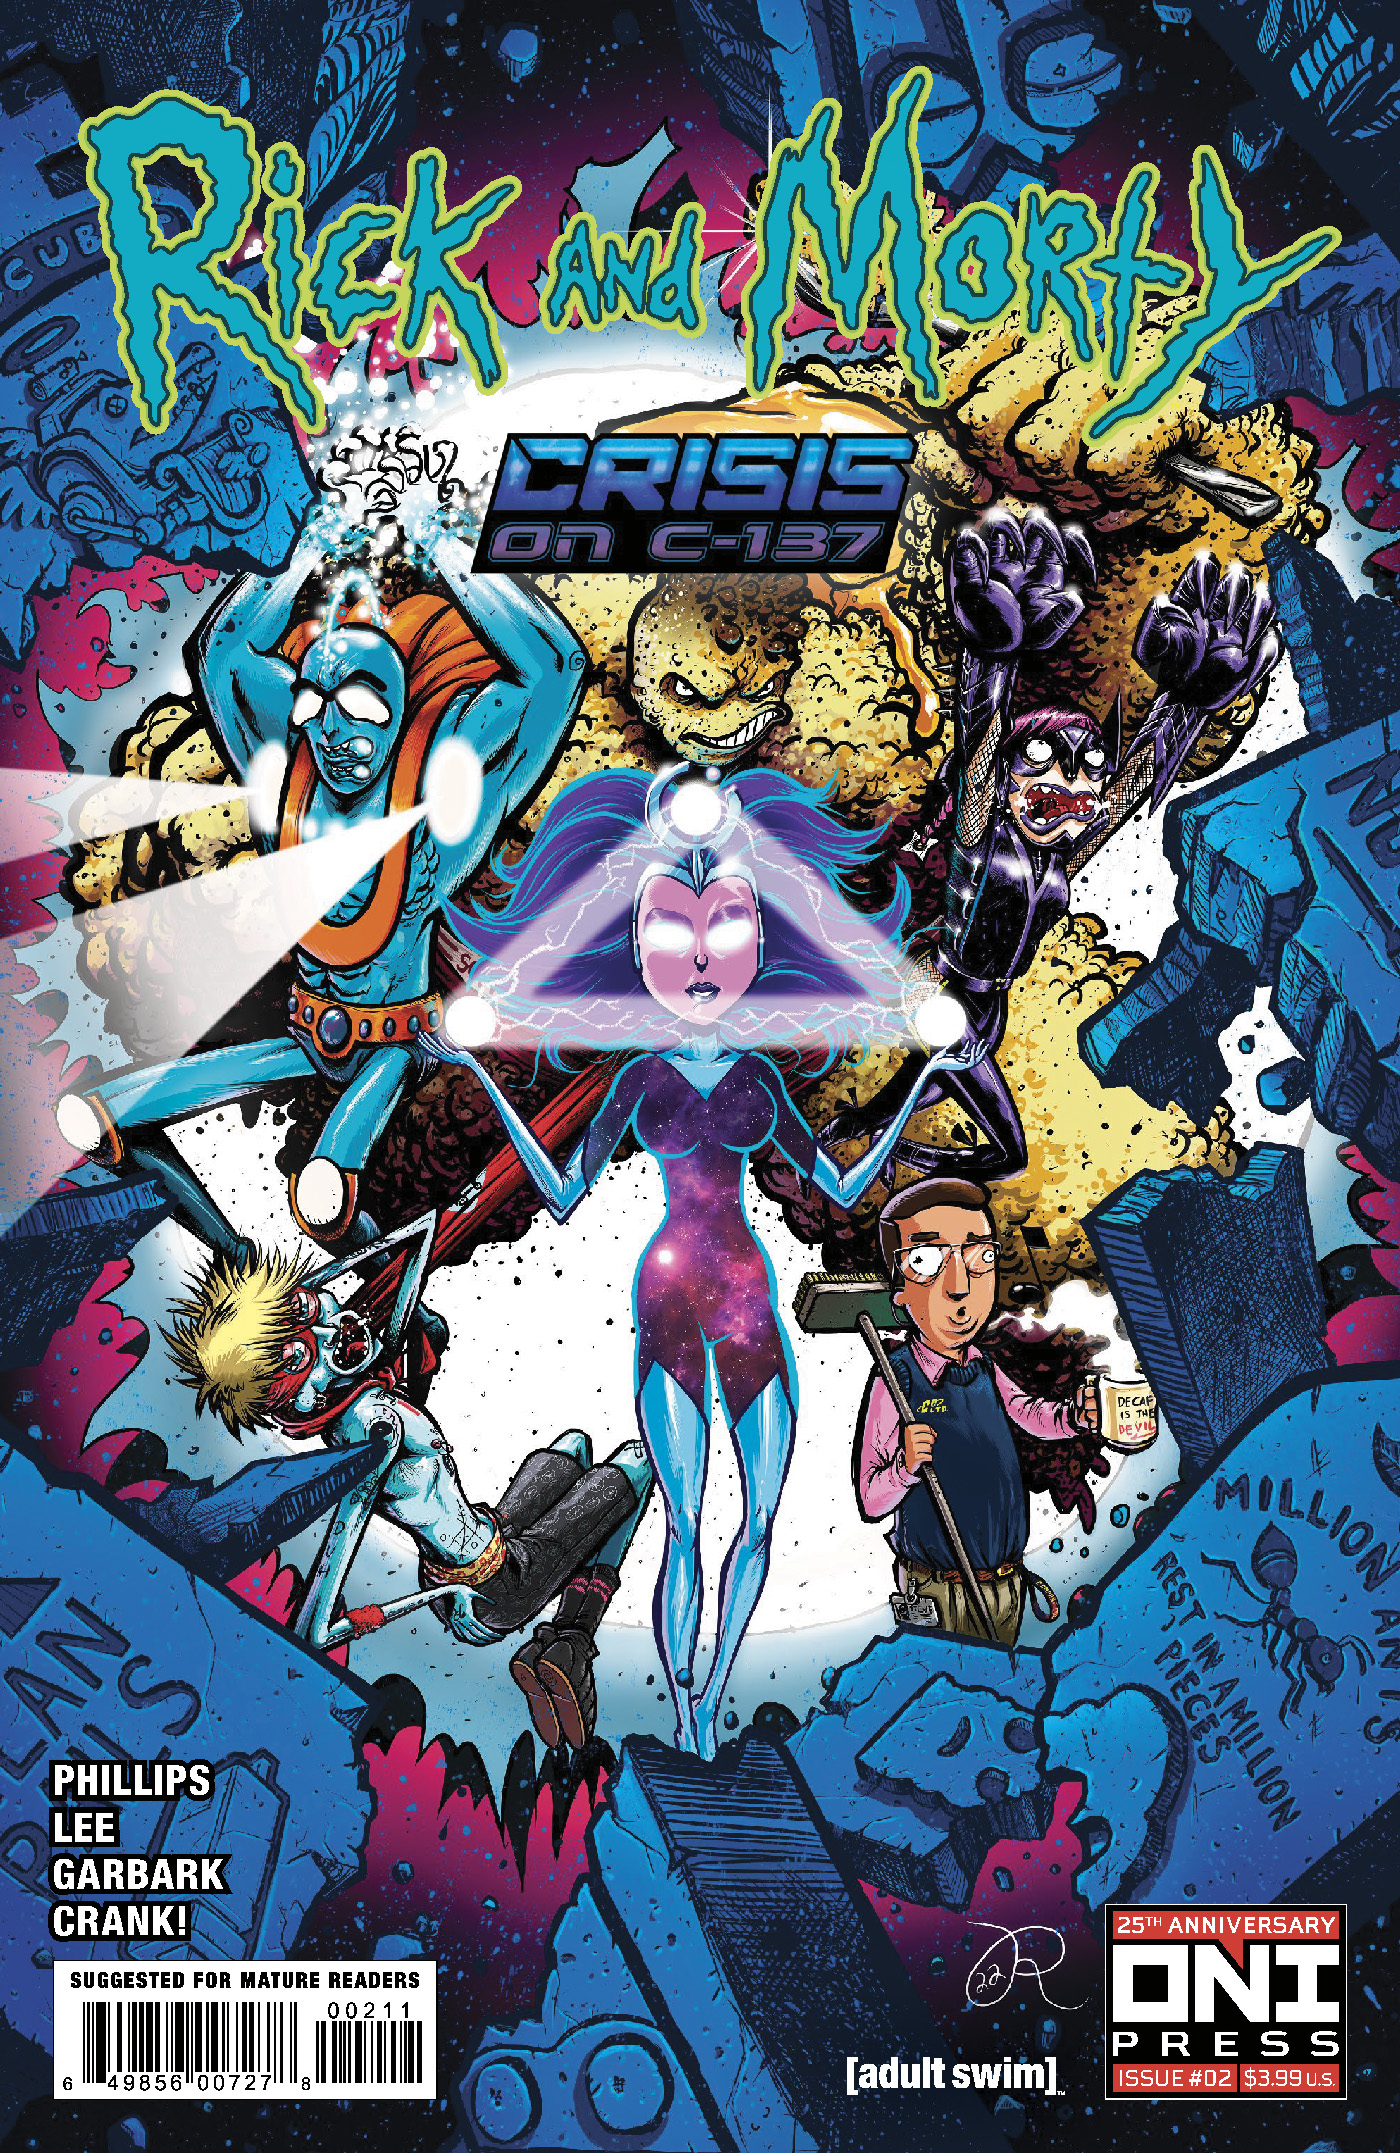 Rick and Morty Crisis On C 137 #2 Cover A Ryan Lee (Of 4)